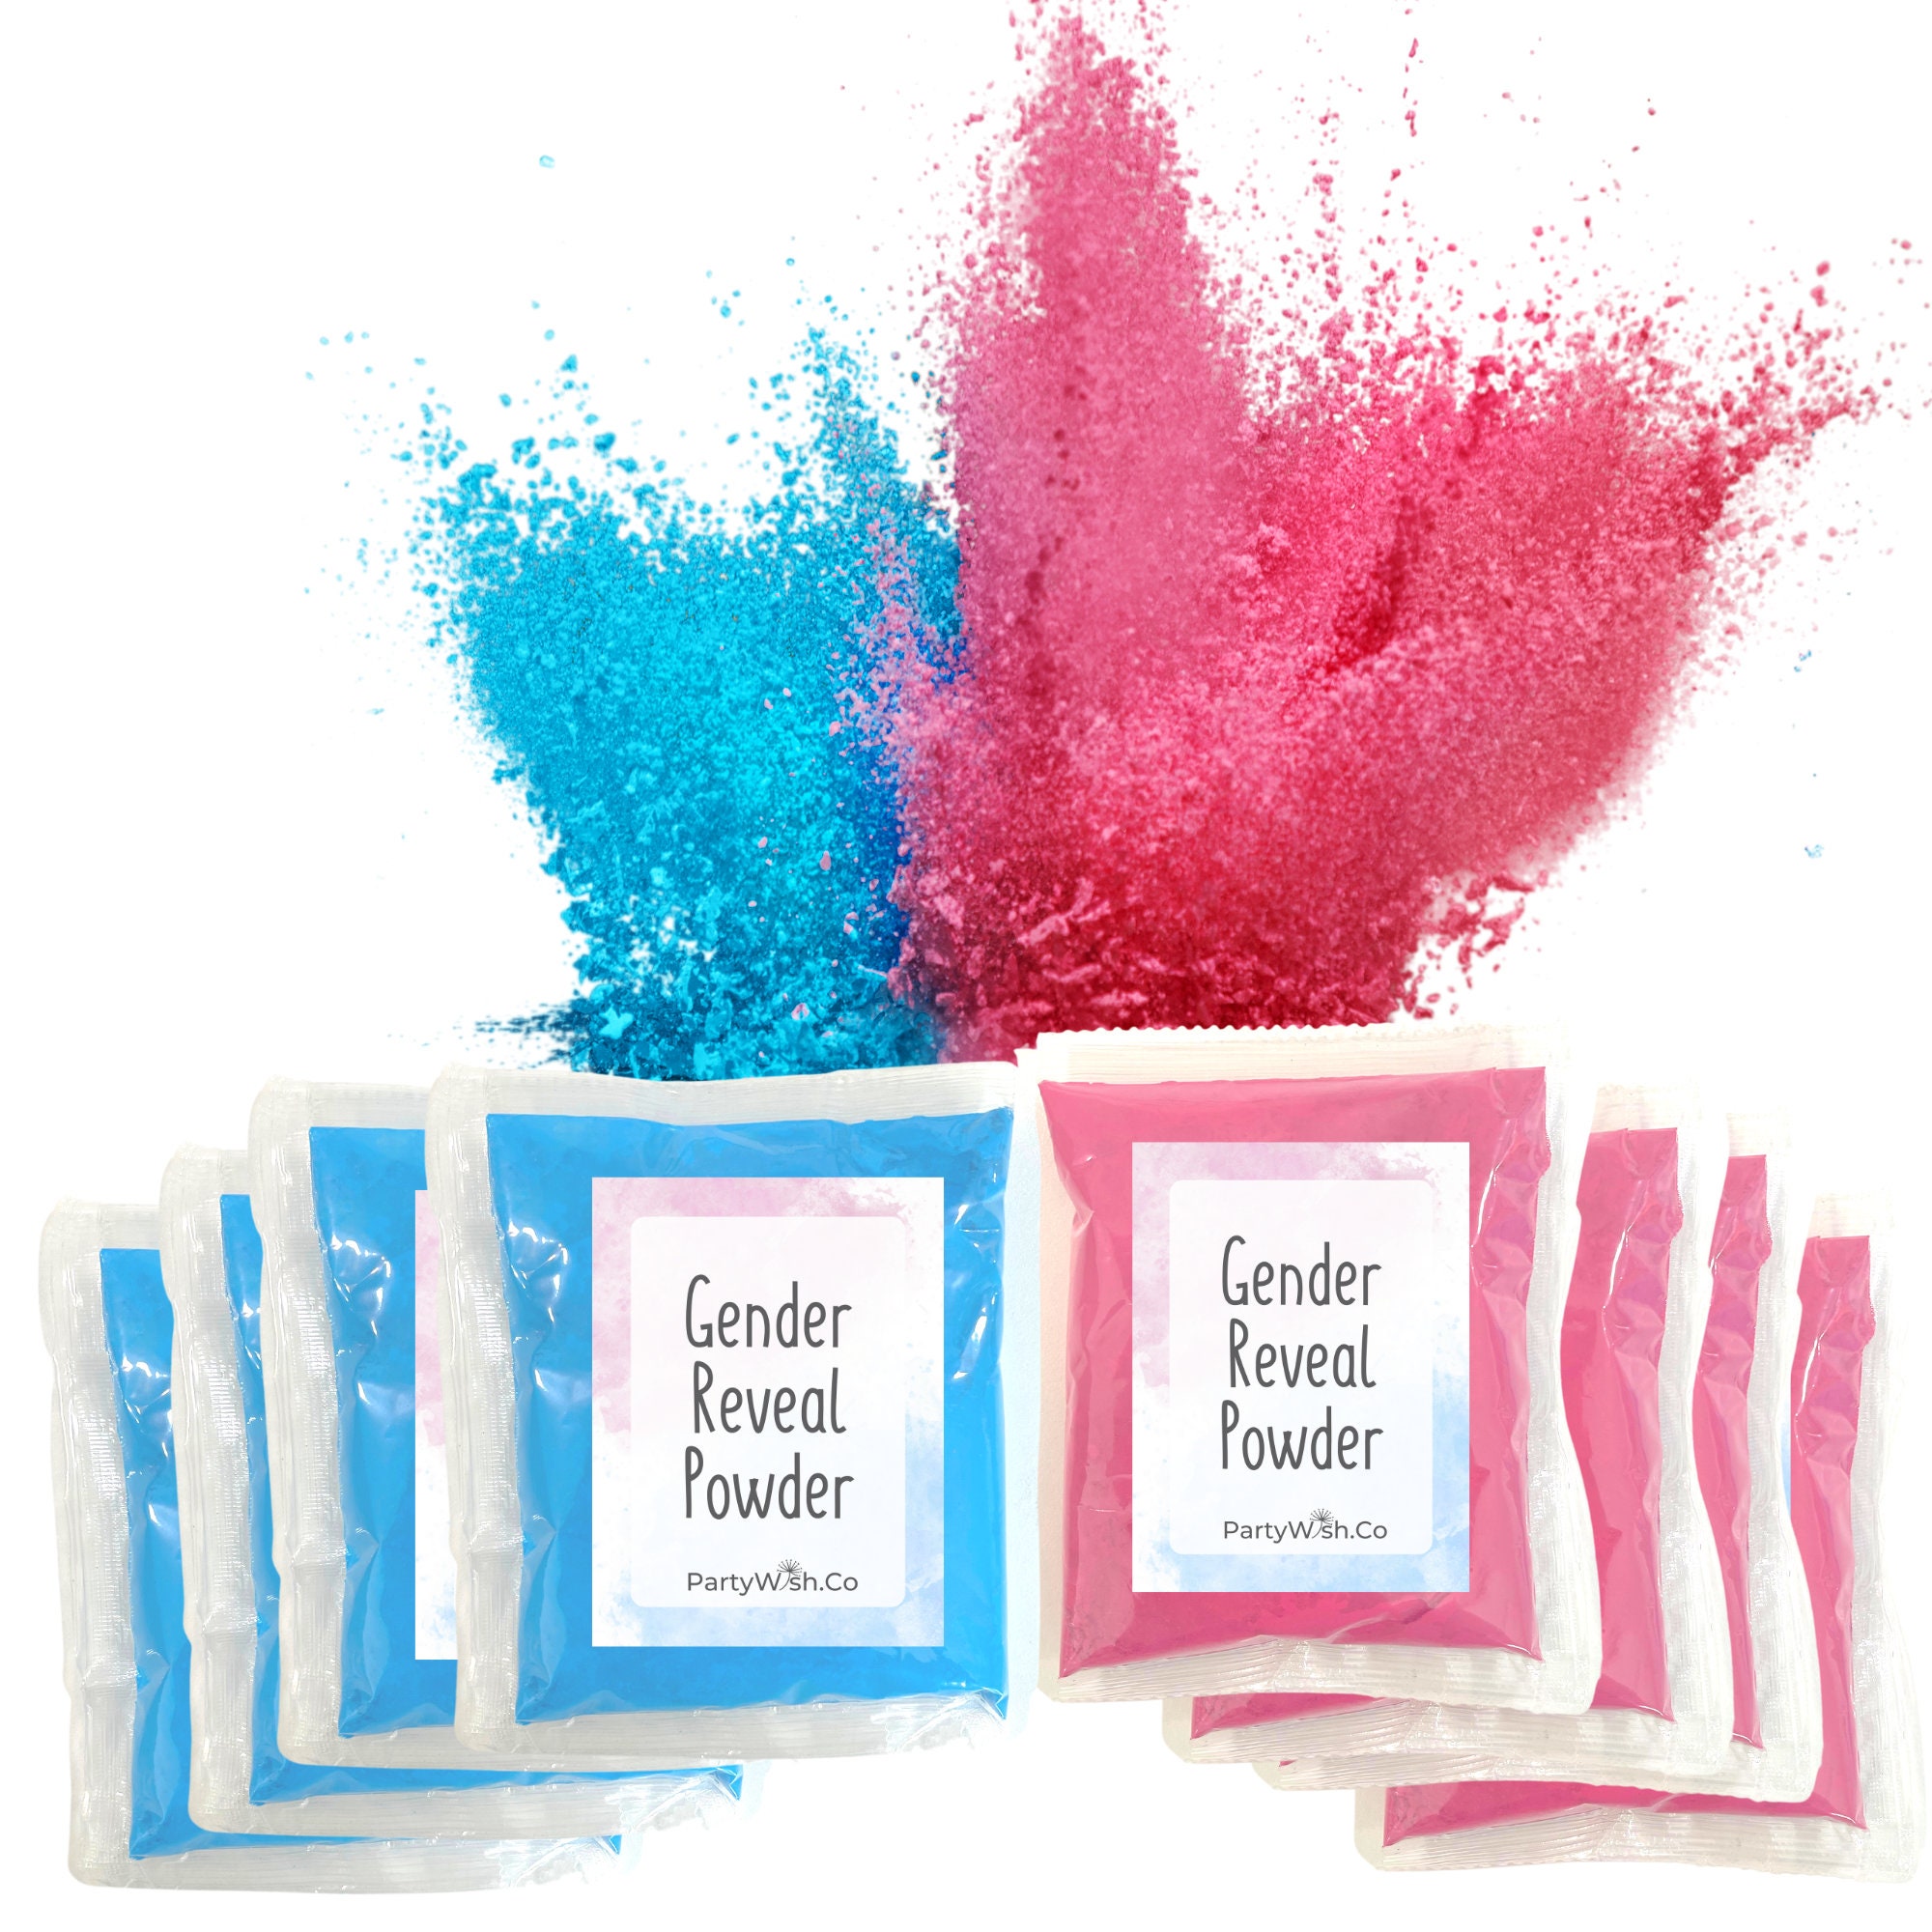 Biodegradable Pink or Blue Gender Reveal Powder to Use With Cannon, Popper,  or Balloon 3 Oz Bags for Gender Reveal Party Decoration Ideas 